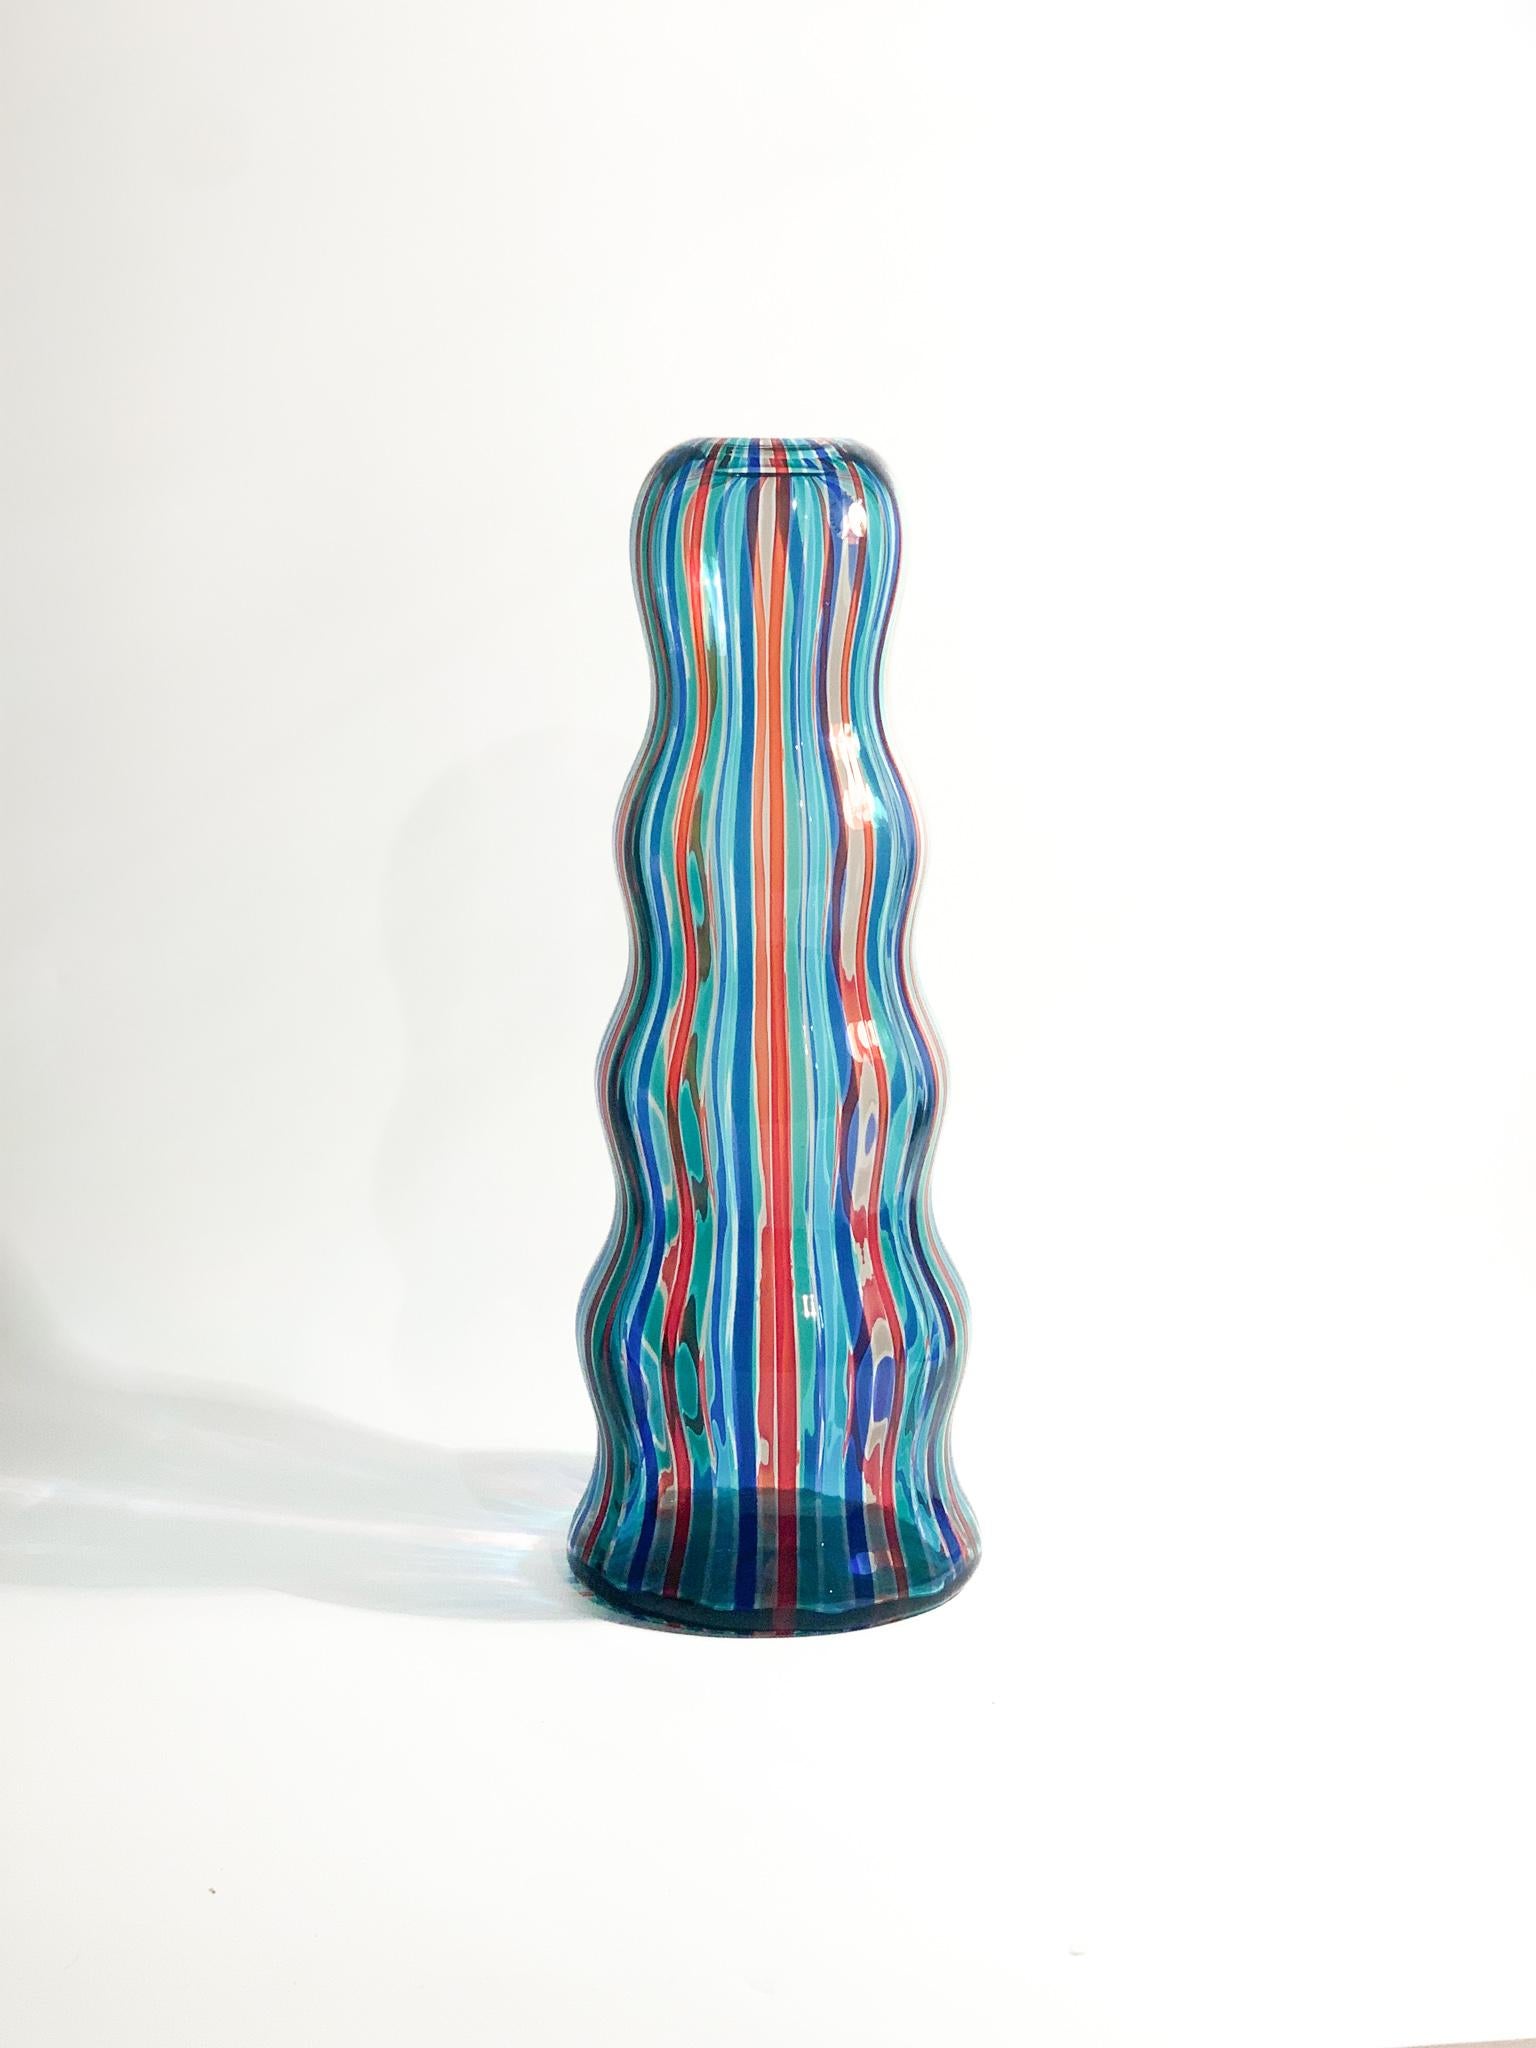 'Arado' vase in Murano glass with cane work, created by Alessandro Mendini for Venini in 1988

Ø 14 cm h 38 cm

Alessandro Mendini from the end of the 70s was among the innovators of Italian design. He worked for numerous companies such as Alessi,